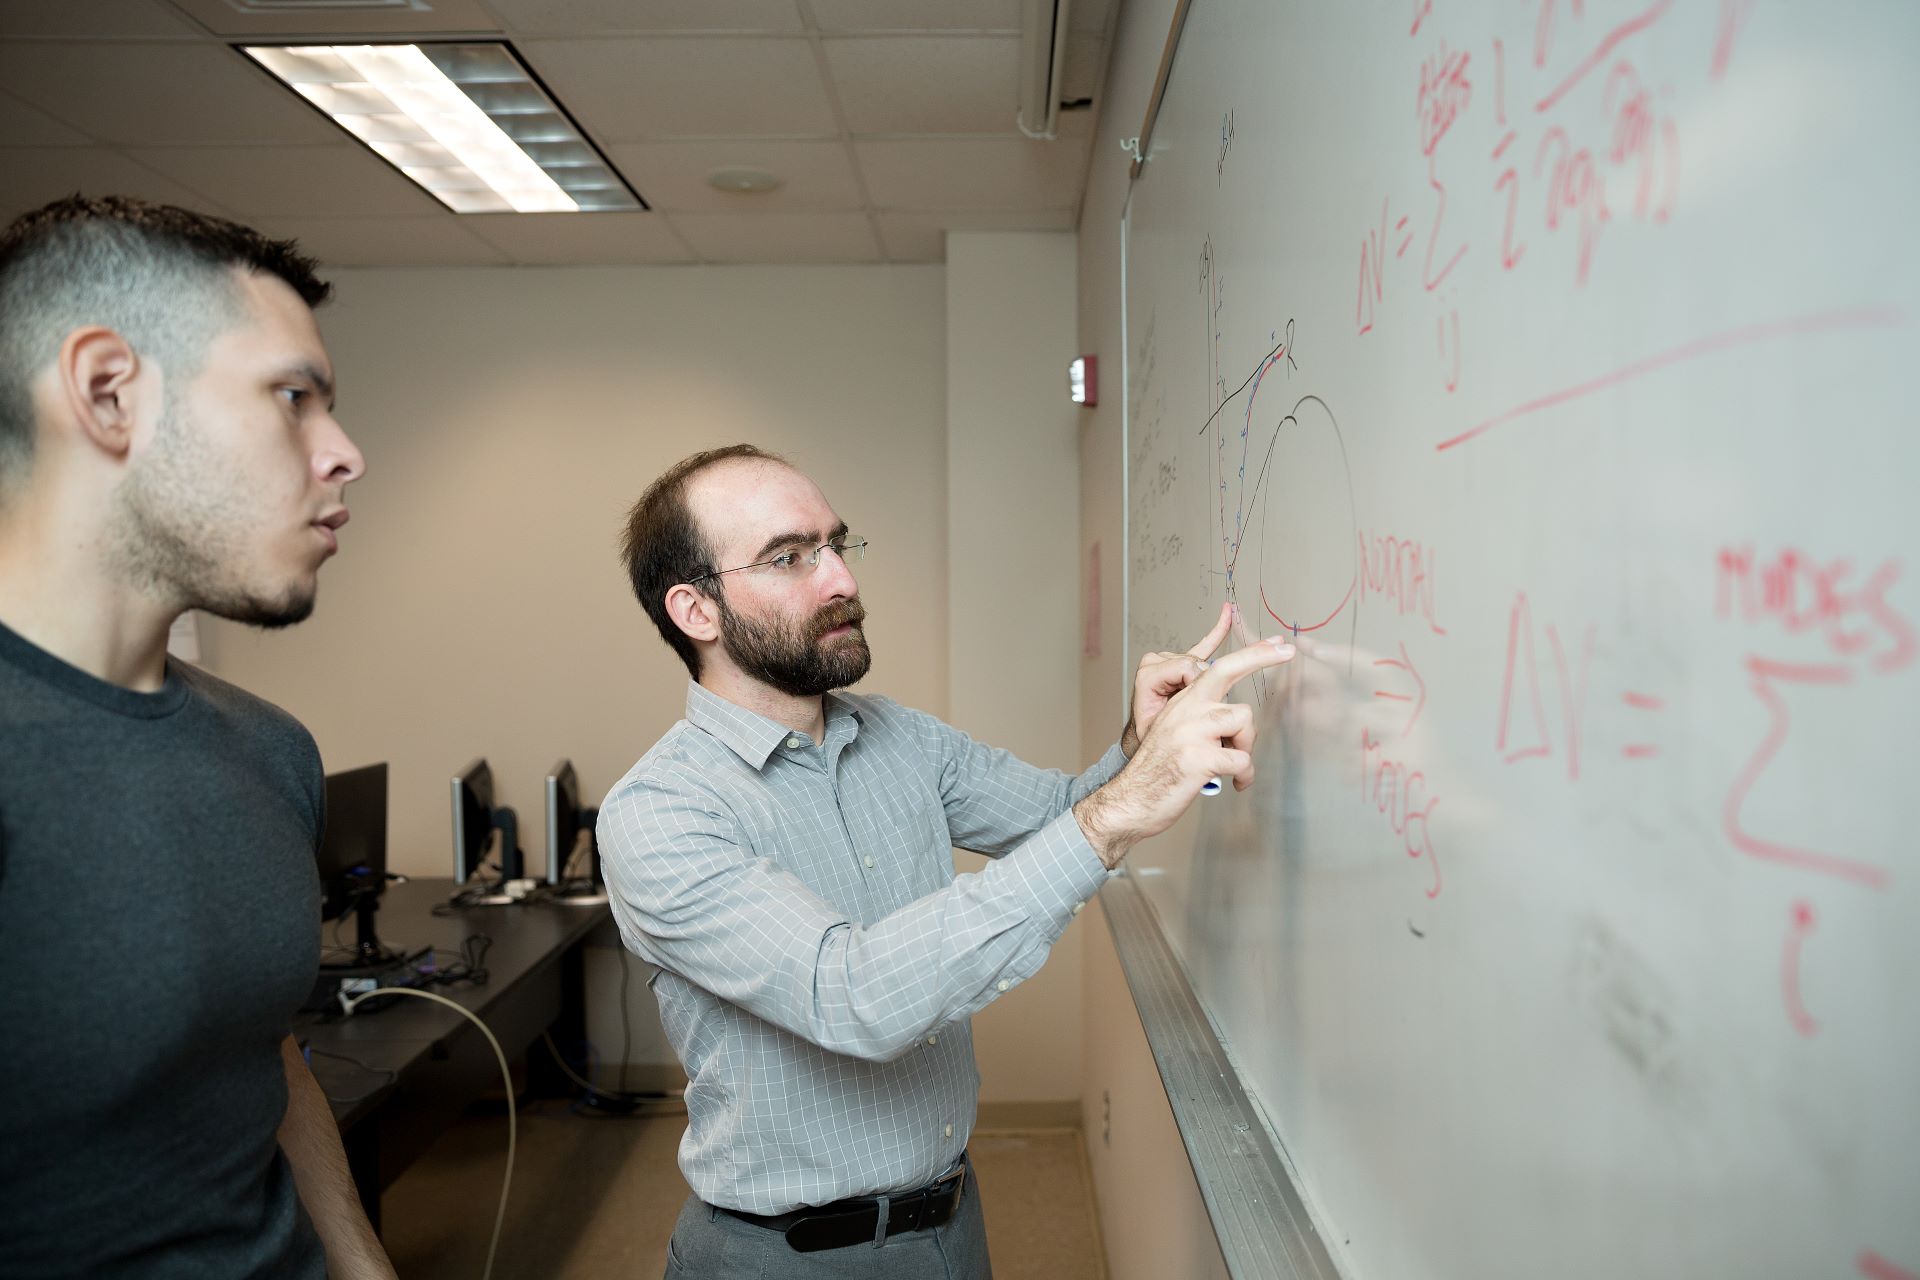 Professor showing student equations on white board